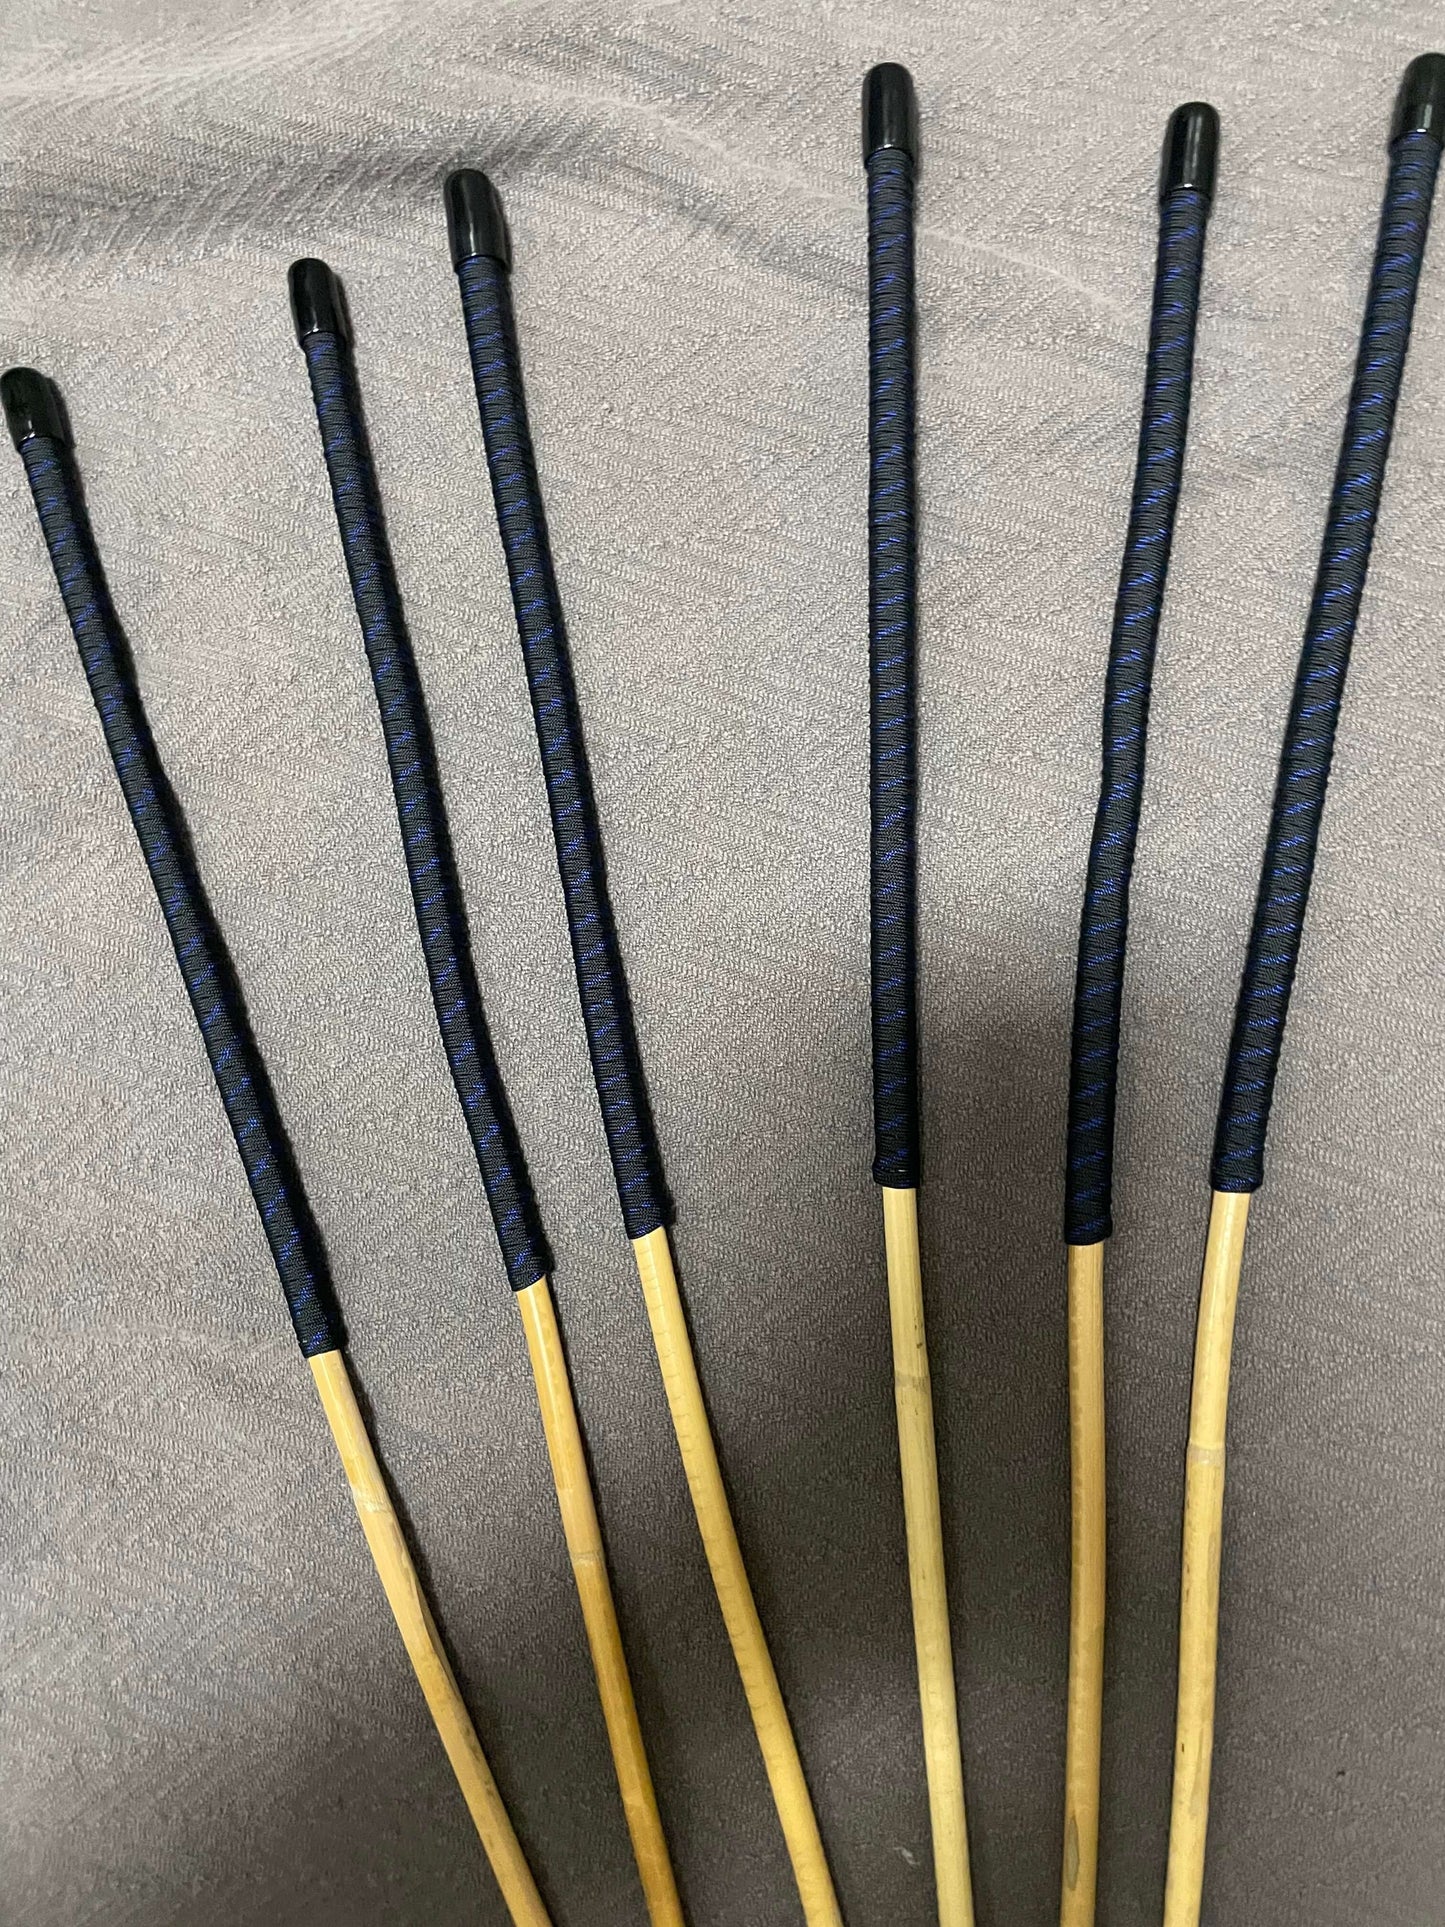 Set of 6 Kooboo Rattan Punishment canes / School Canes / BDSM Canes with Blue Streak Paracord Handles -- 83 to 87 cms Length - Englishvice Canes